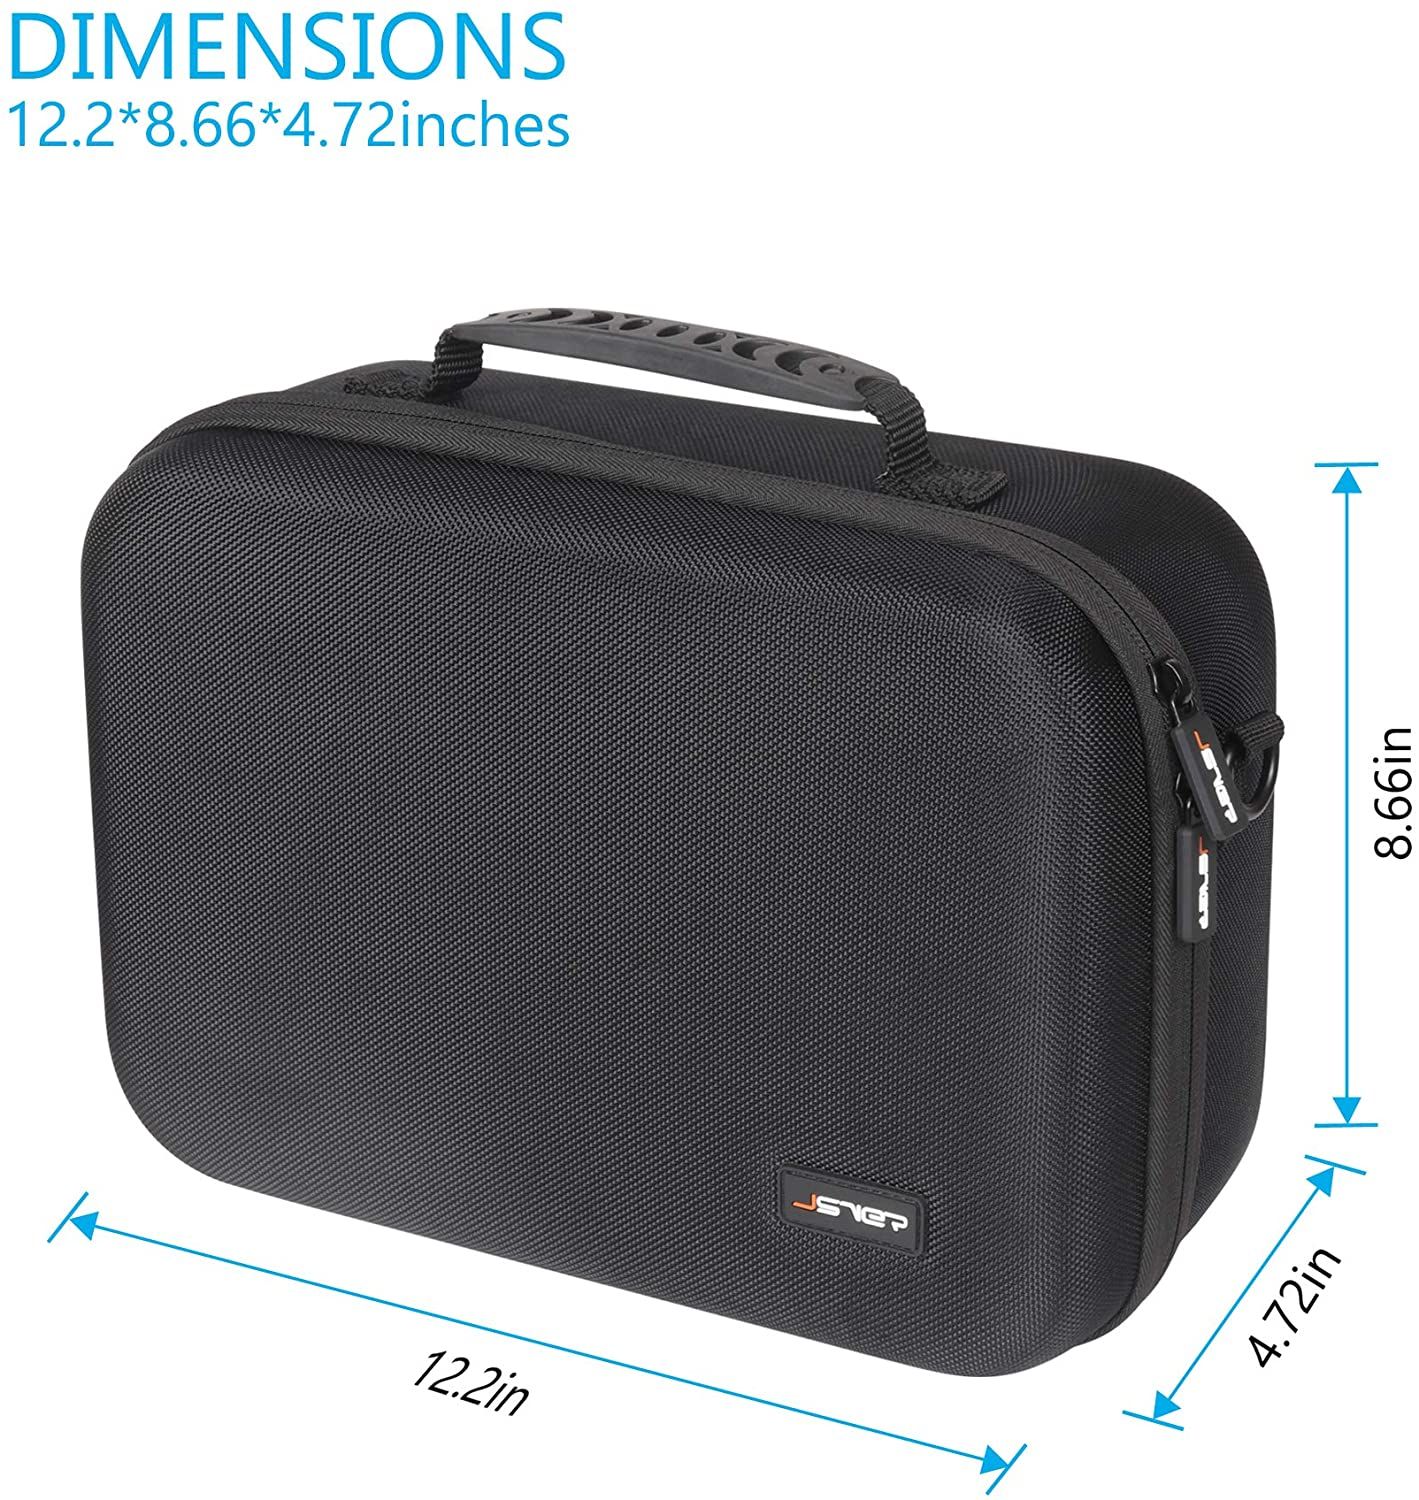 The dimensions of a hard carrying case for VR